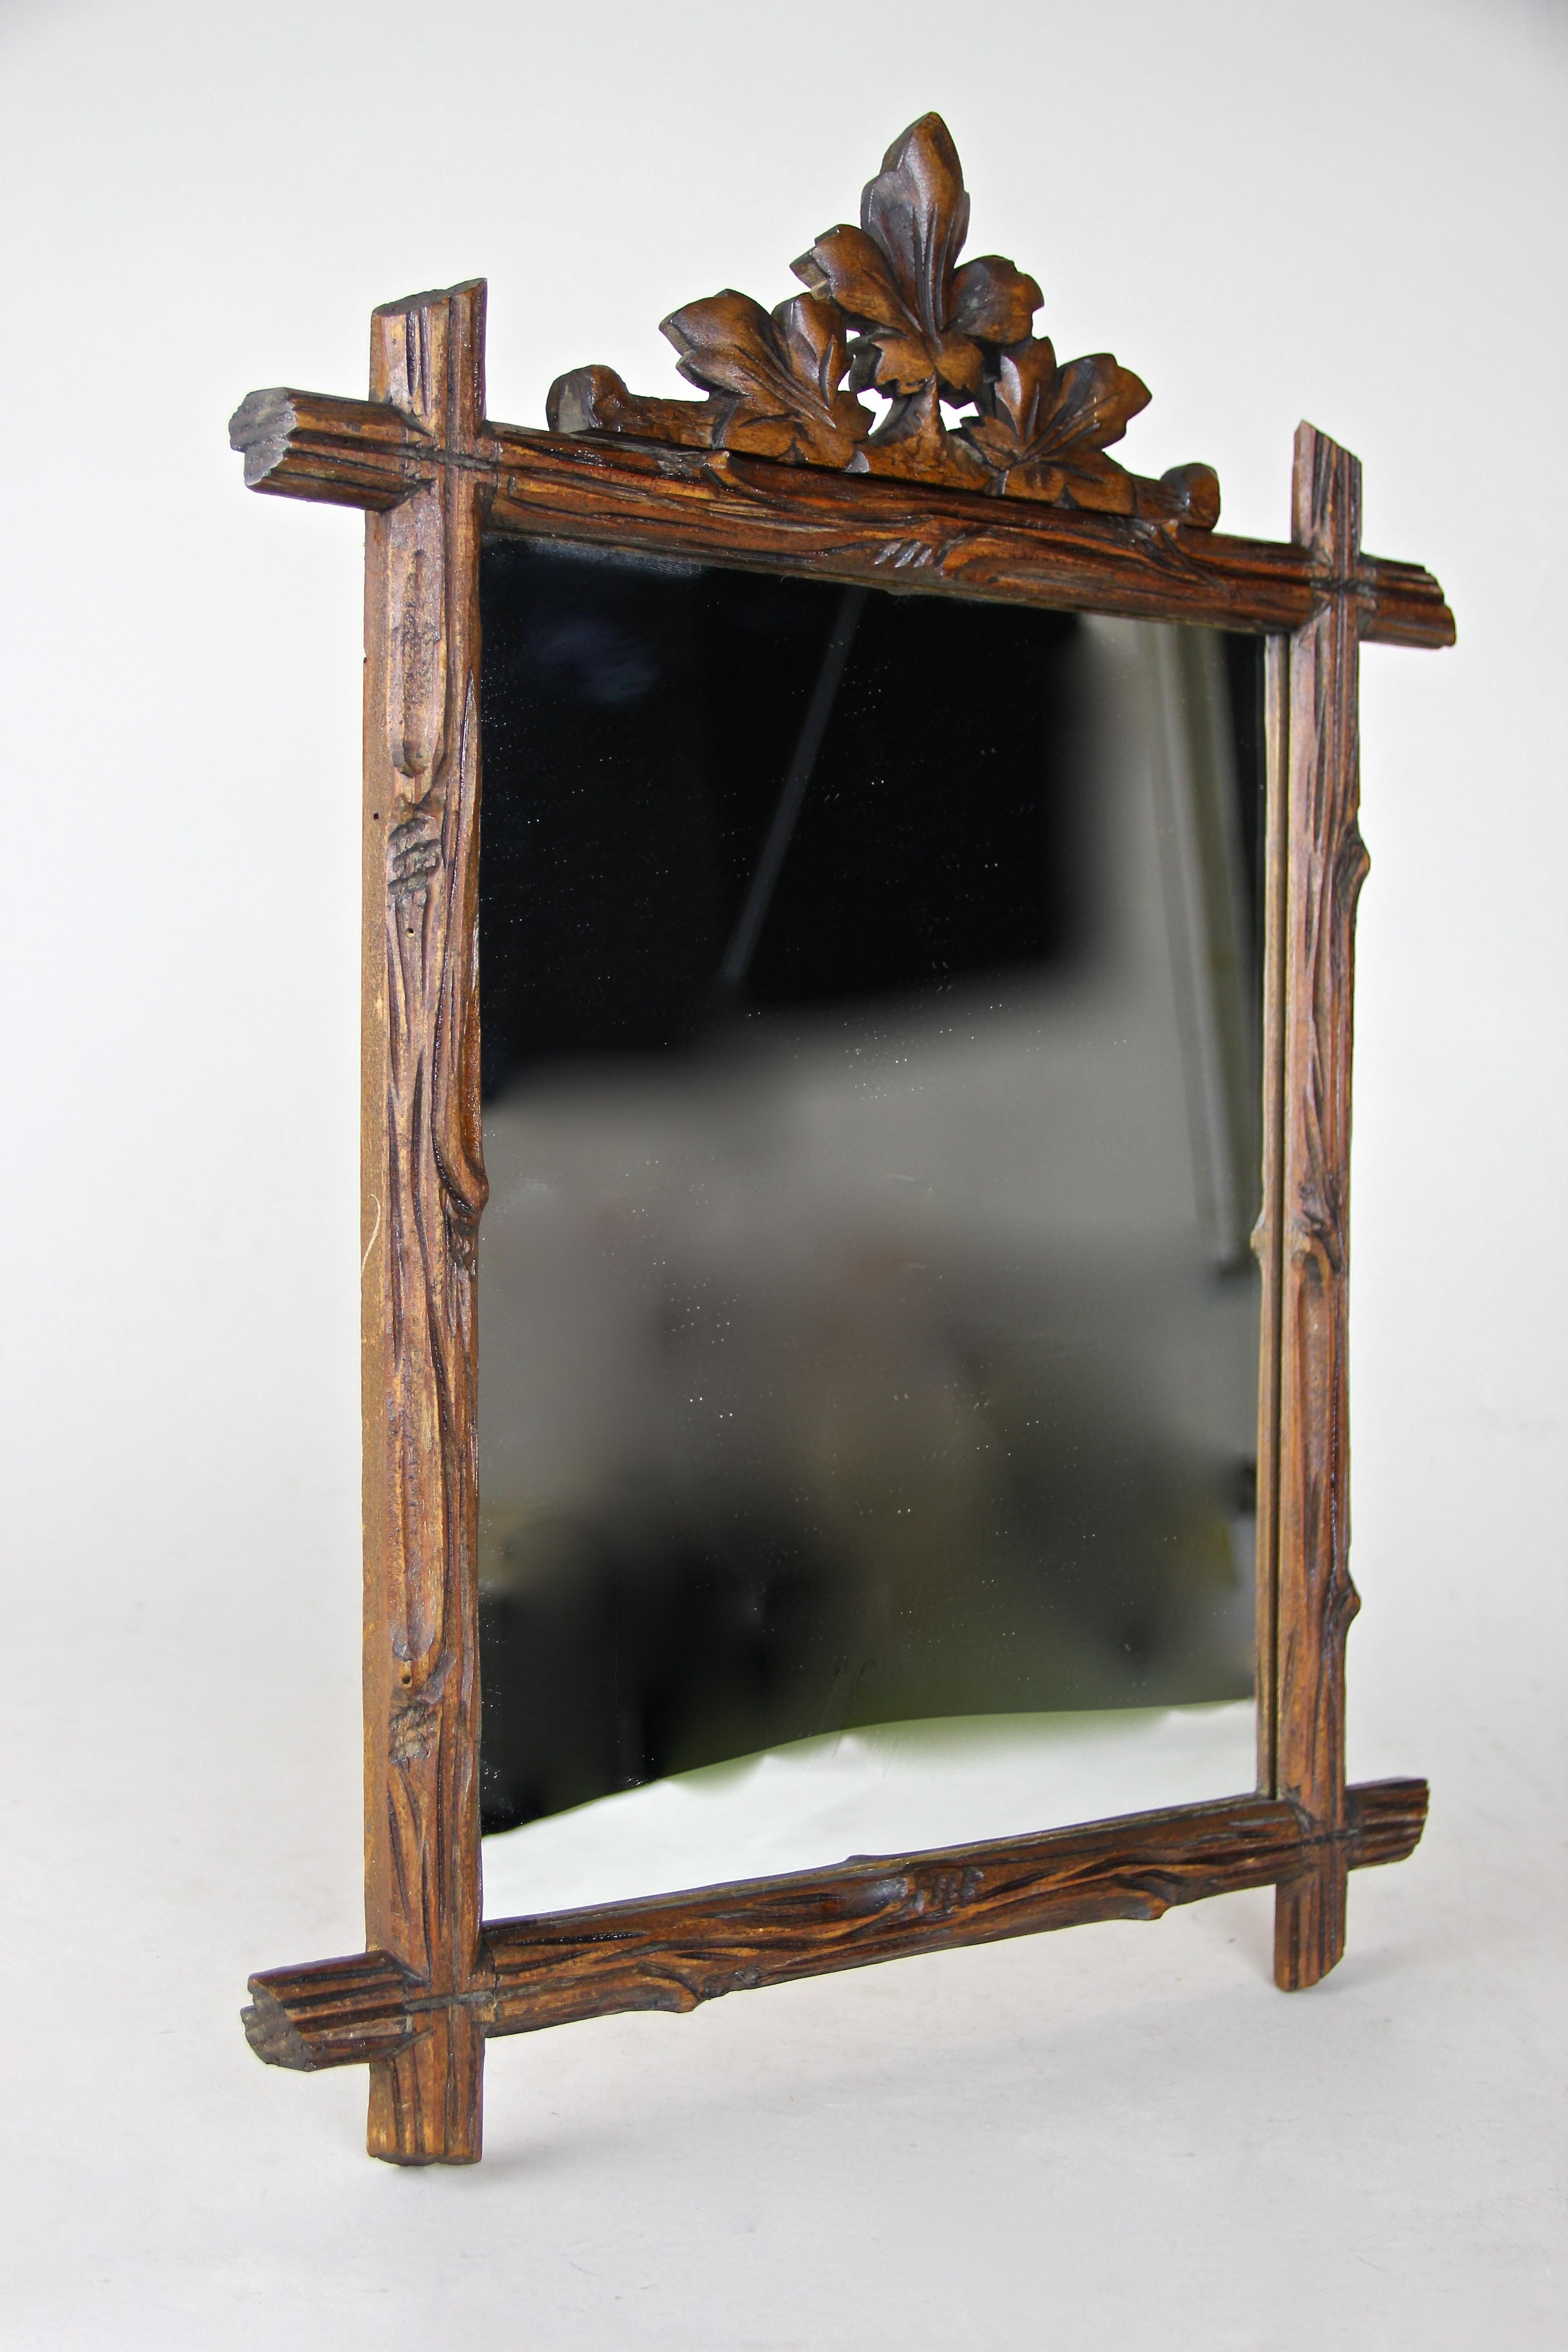 Small rustic wall mirror from Austria circa 1890, artfully hand carved out of softwood. Stained and waxed, the frame impresses with its 